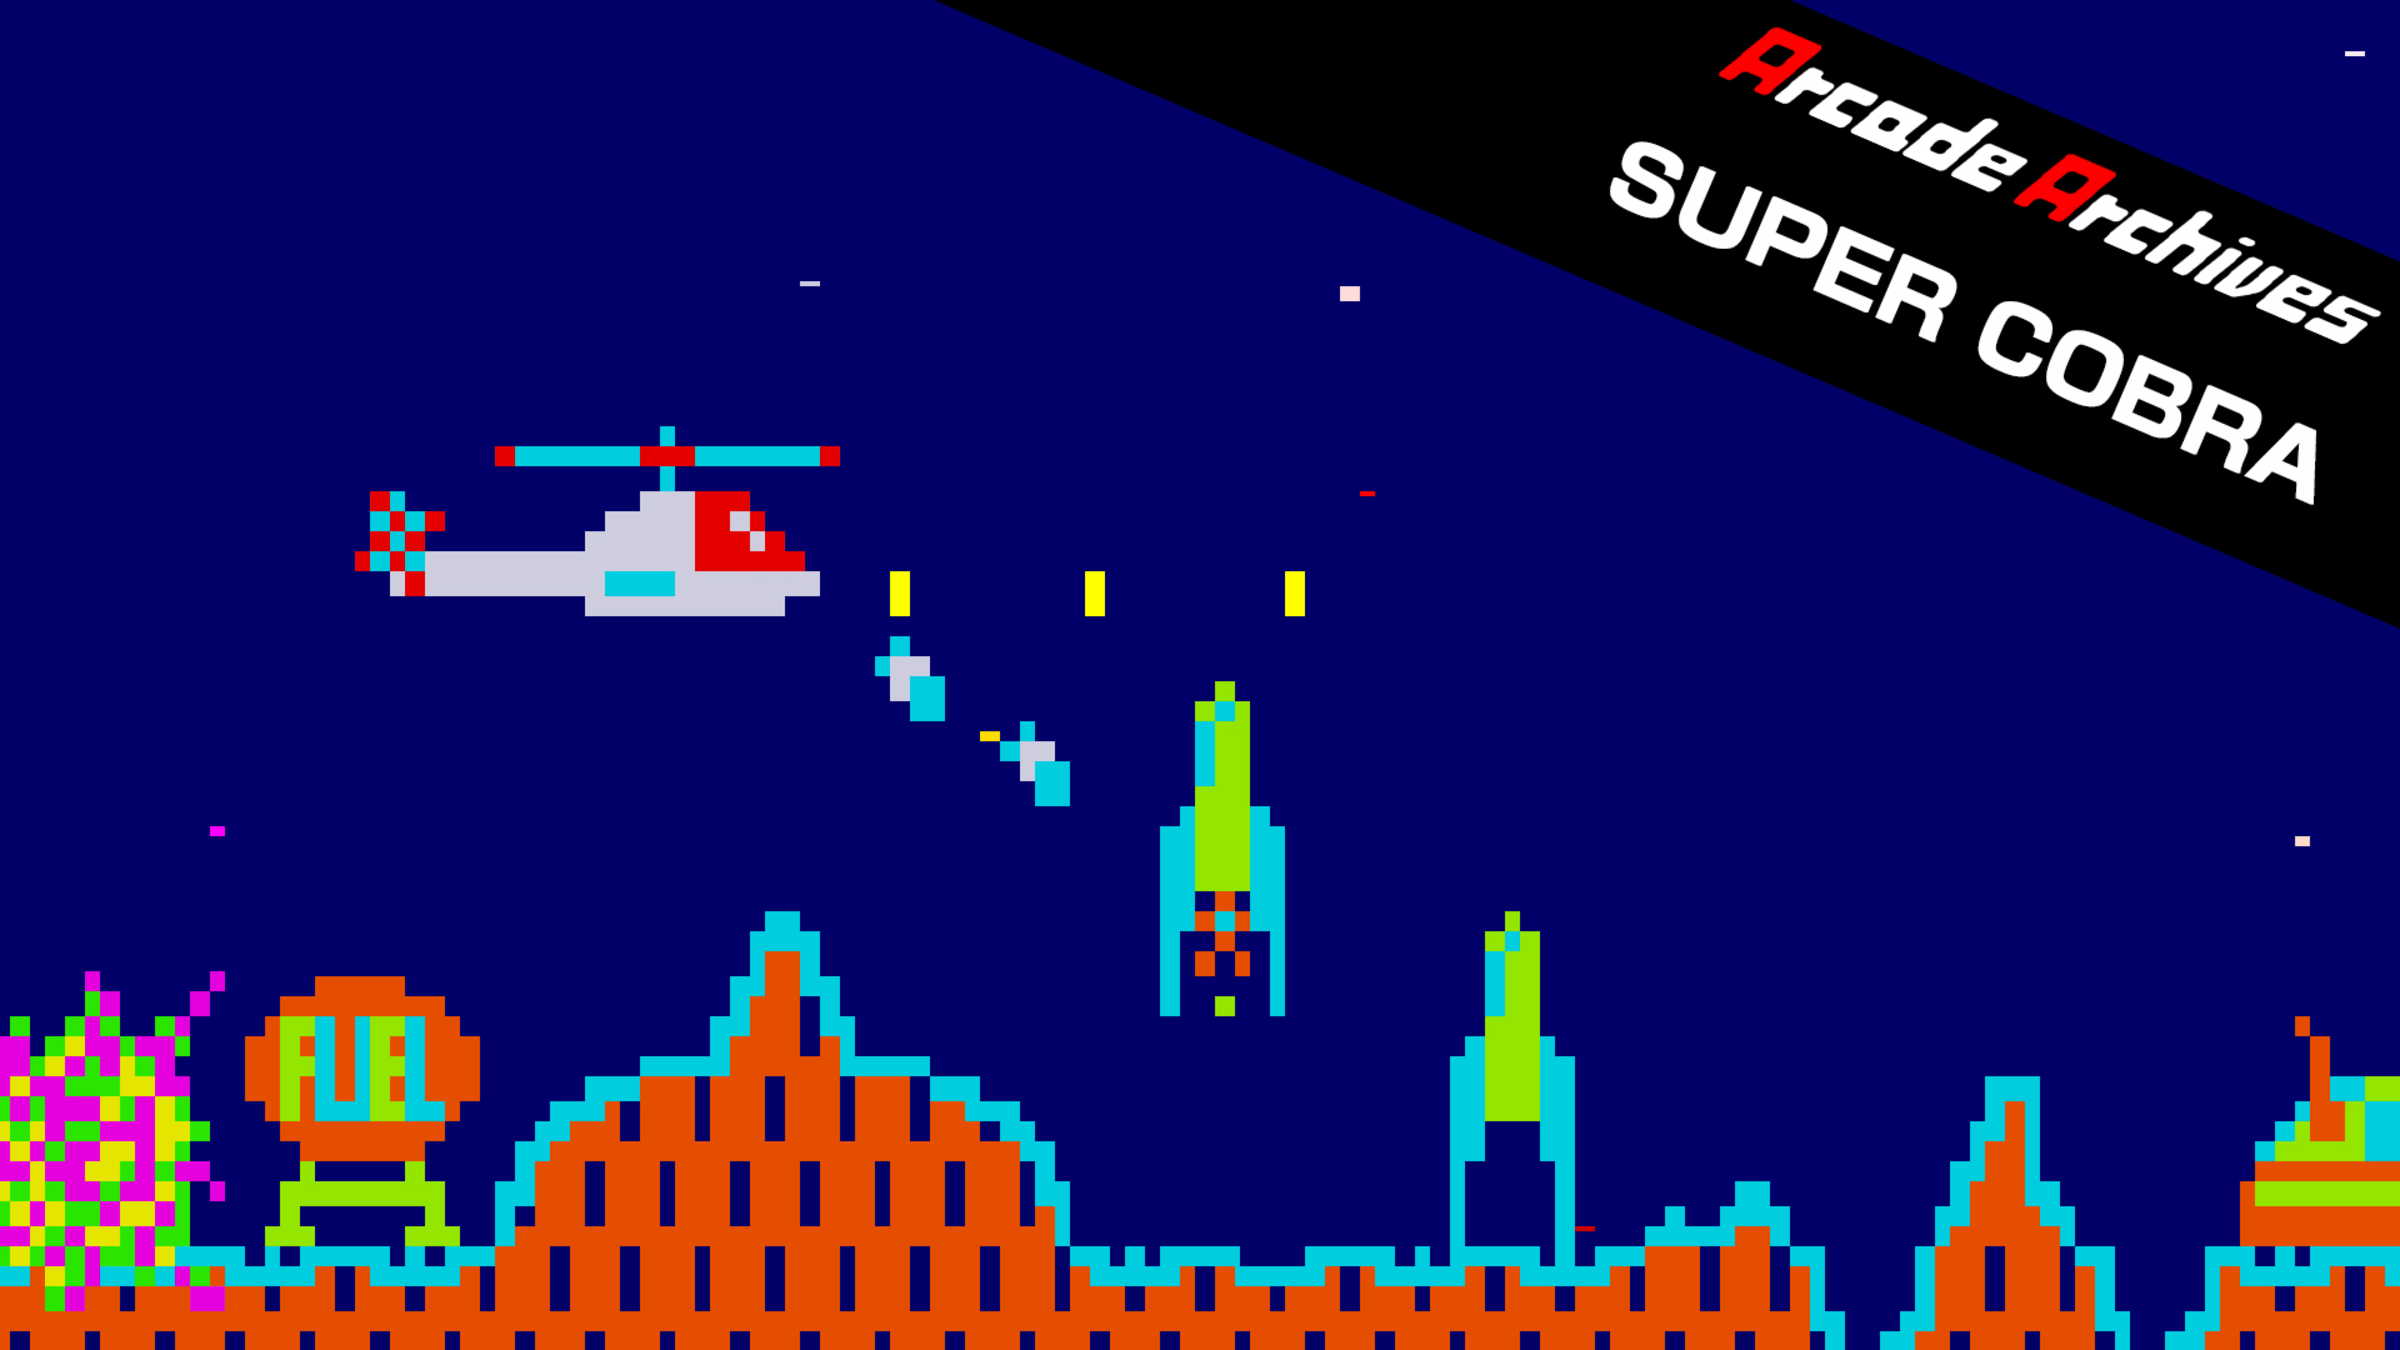 Play Arcade Super Cobra Online in your browser 